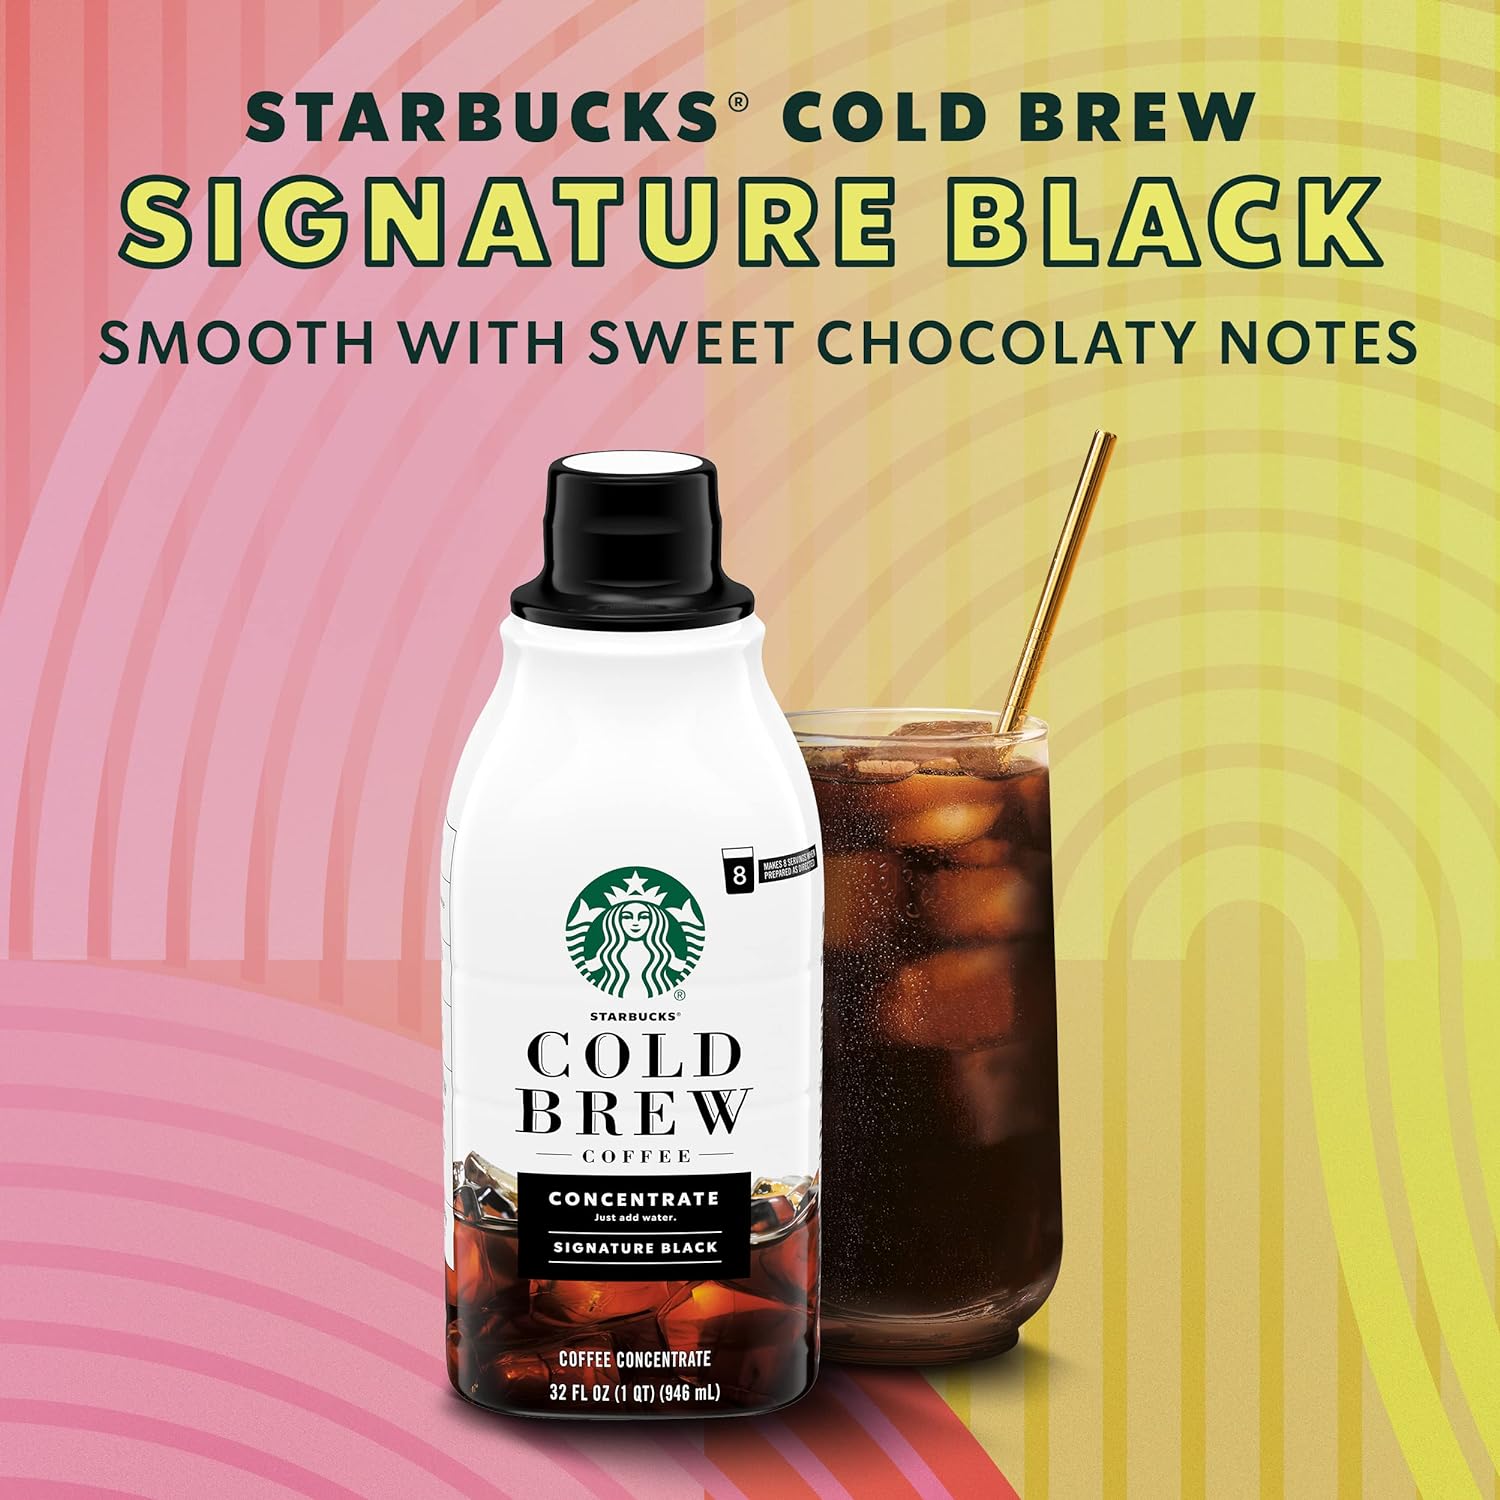 Starbucks Summer Variety Pack, K-Cup Coffee Pods Naturally Flavored Toasted Coconut Mocha And Cold Brew Concentrates Signature Black, Madagascar Vanilla, 100% Arabica, 10 pods And 32 fl oz each : Everything Else